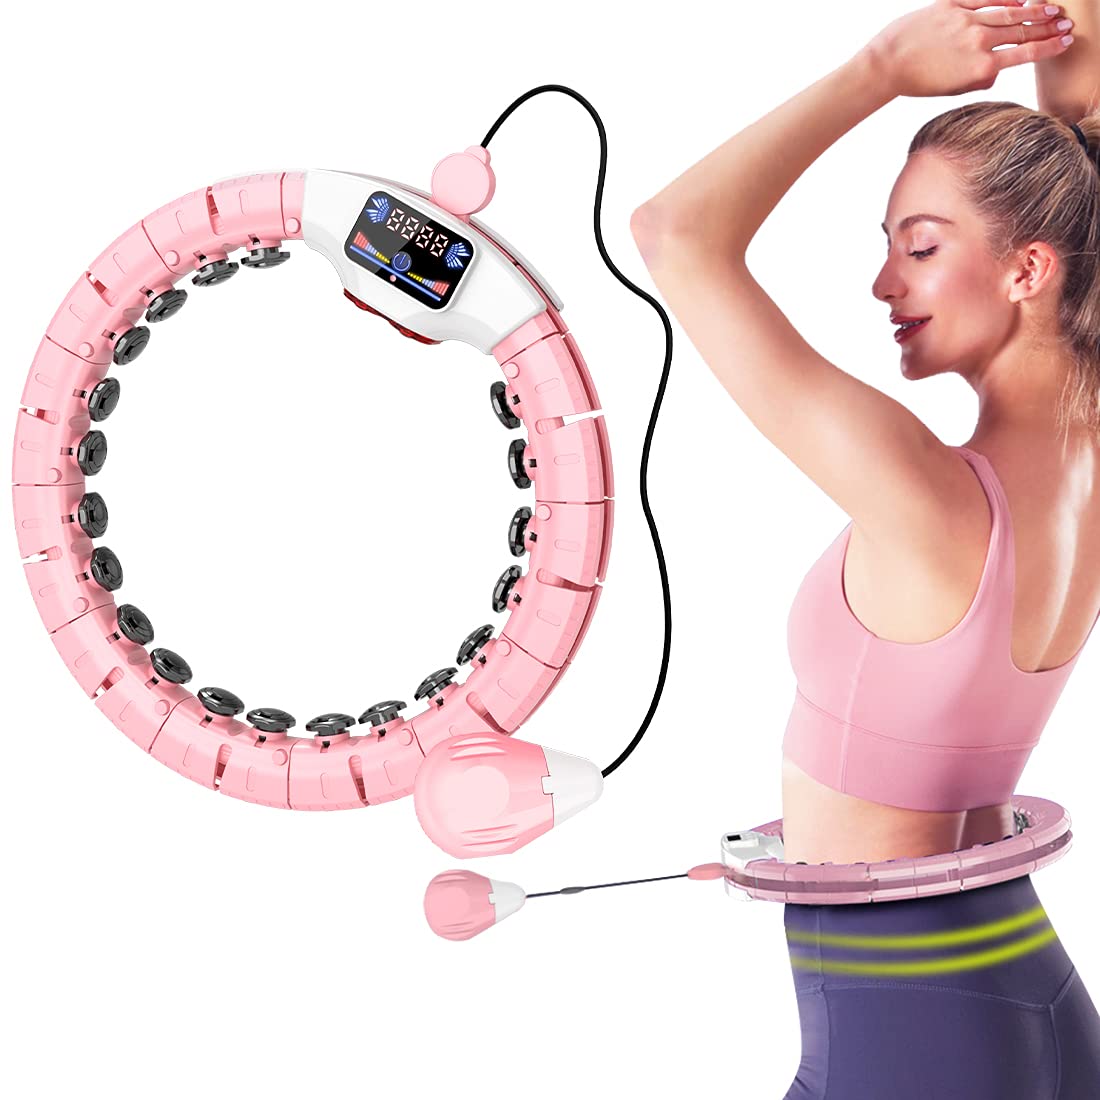 Best Rectangle Trampline Suppliers –  Hula Hoop Weighted Hoola Hoops Smart Hula Hoop, LED Counter 25 Detachable Knots Exercise Fitness Hoop for Weight Loss  – Yiwu Real